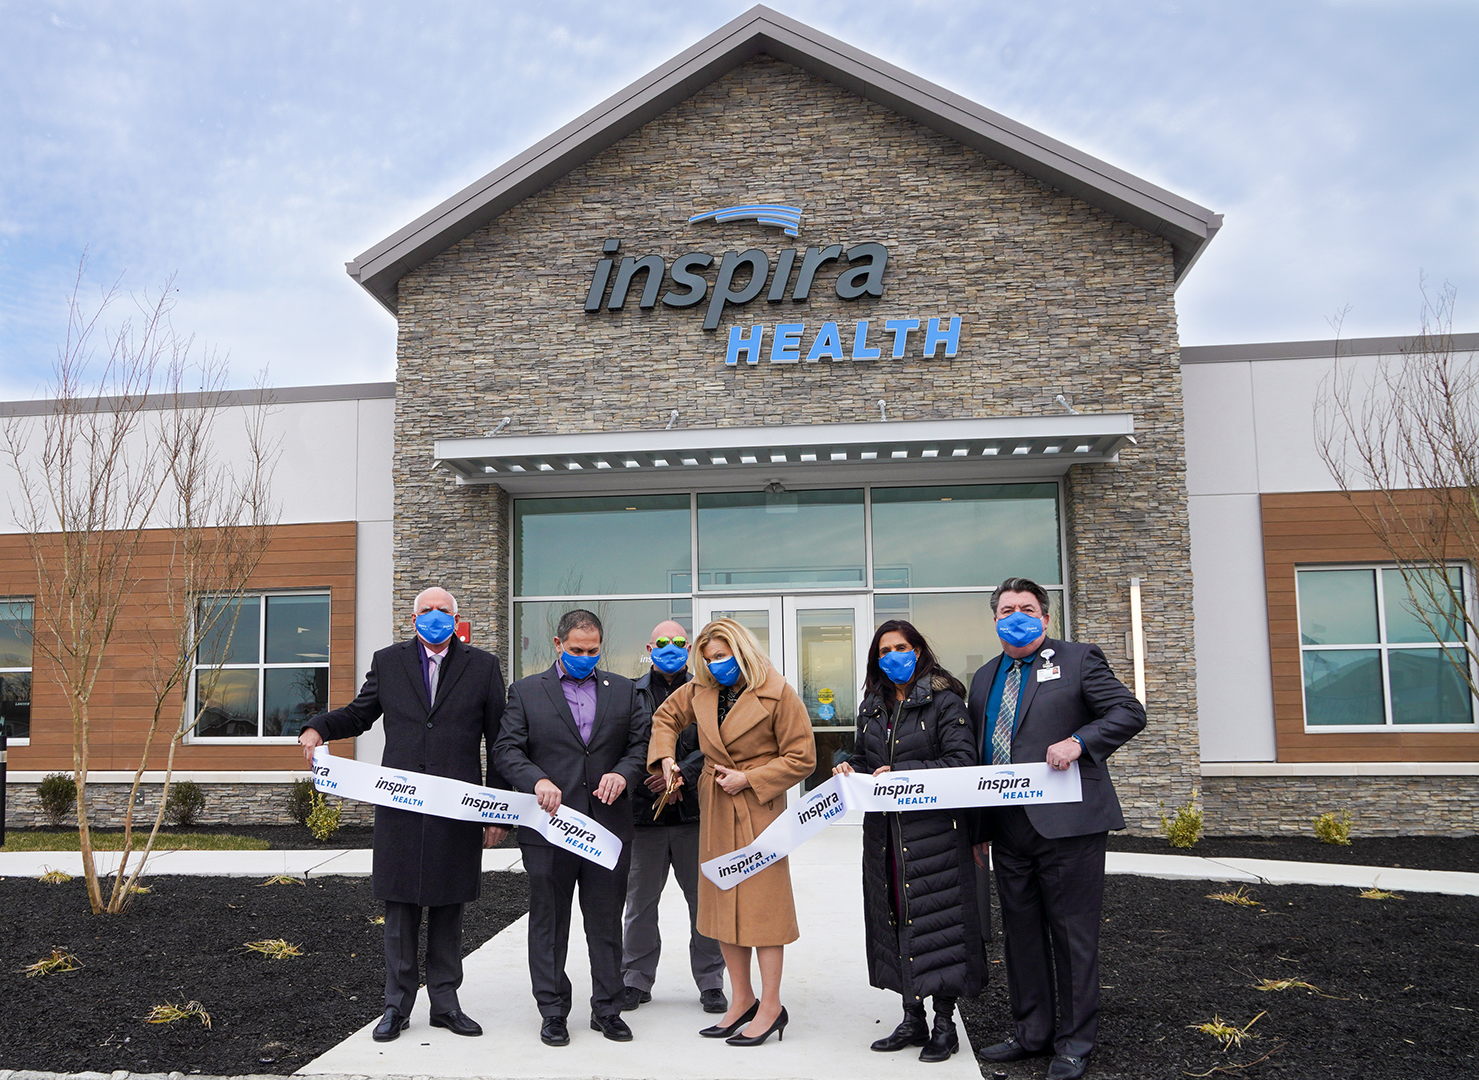 Inspira Health Center Woolwich - (Left to right: Ron Rossi, Chairman Inspira Health Board; Mayor Vernon Marino of Woolwich Township; Richard Jaramillo, Chief of Police Woolwich Township; Amy Mansue, President and CEO Inspira Health;  Alka Kohli, Executive VP and Chief Population Health Clinical Officer; David Yhlen, Chief Operating Officer and VP of Ambulatory Services)